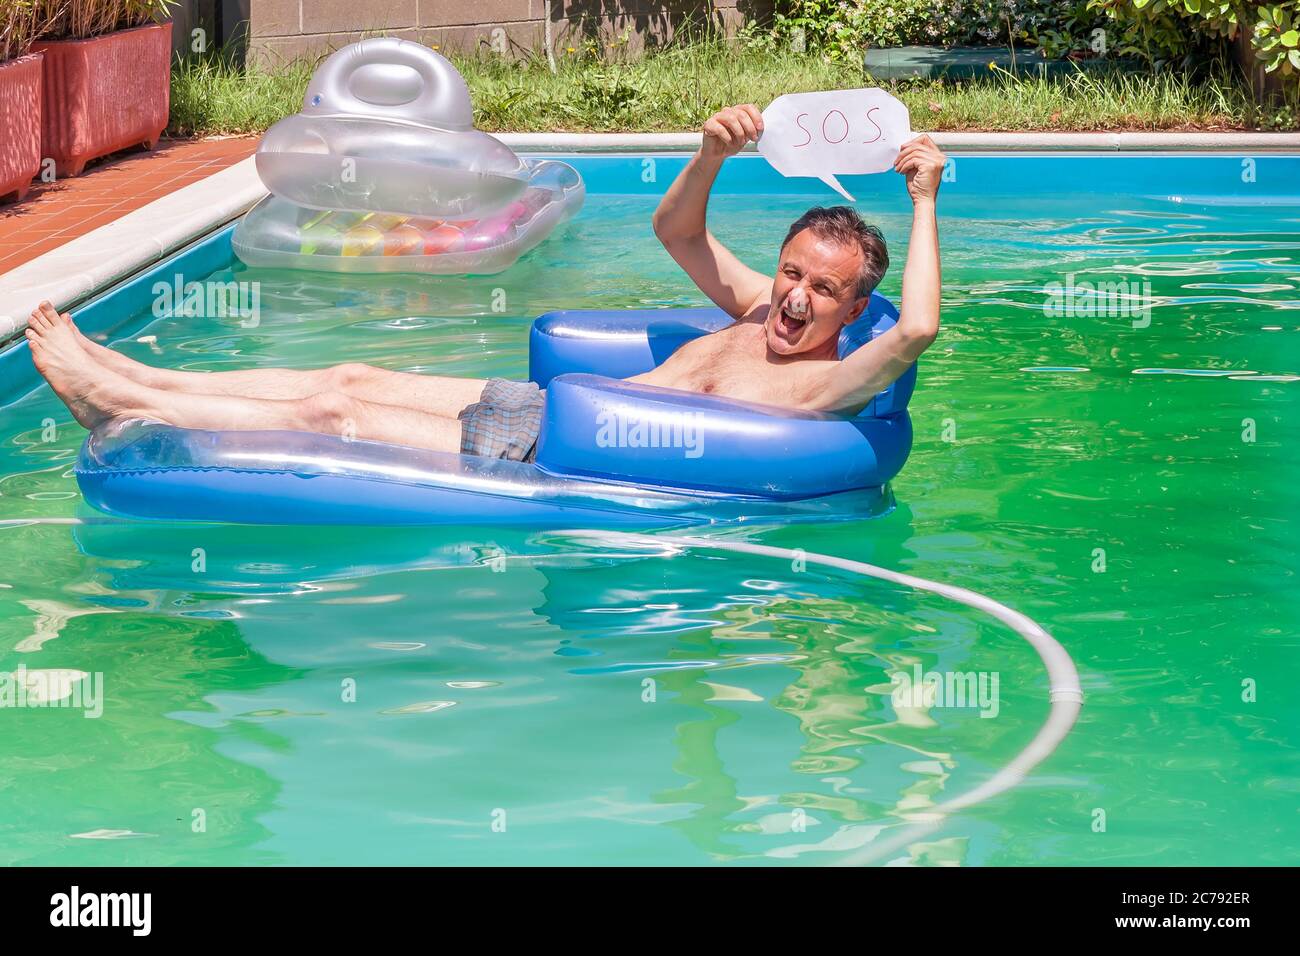 A white man on an inflatable mattress in a swimming pool holds the S.O.S. to ask for help Stock Photo